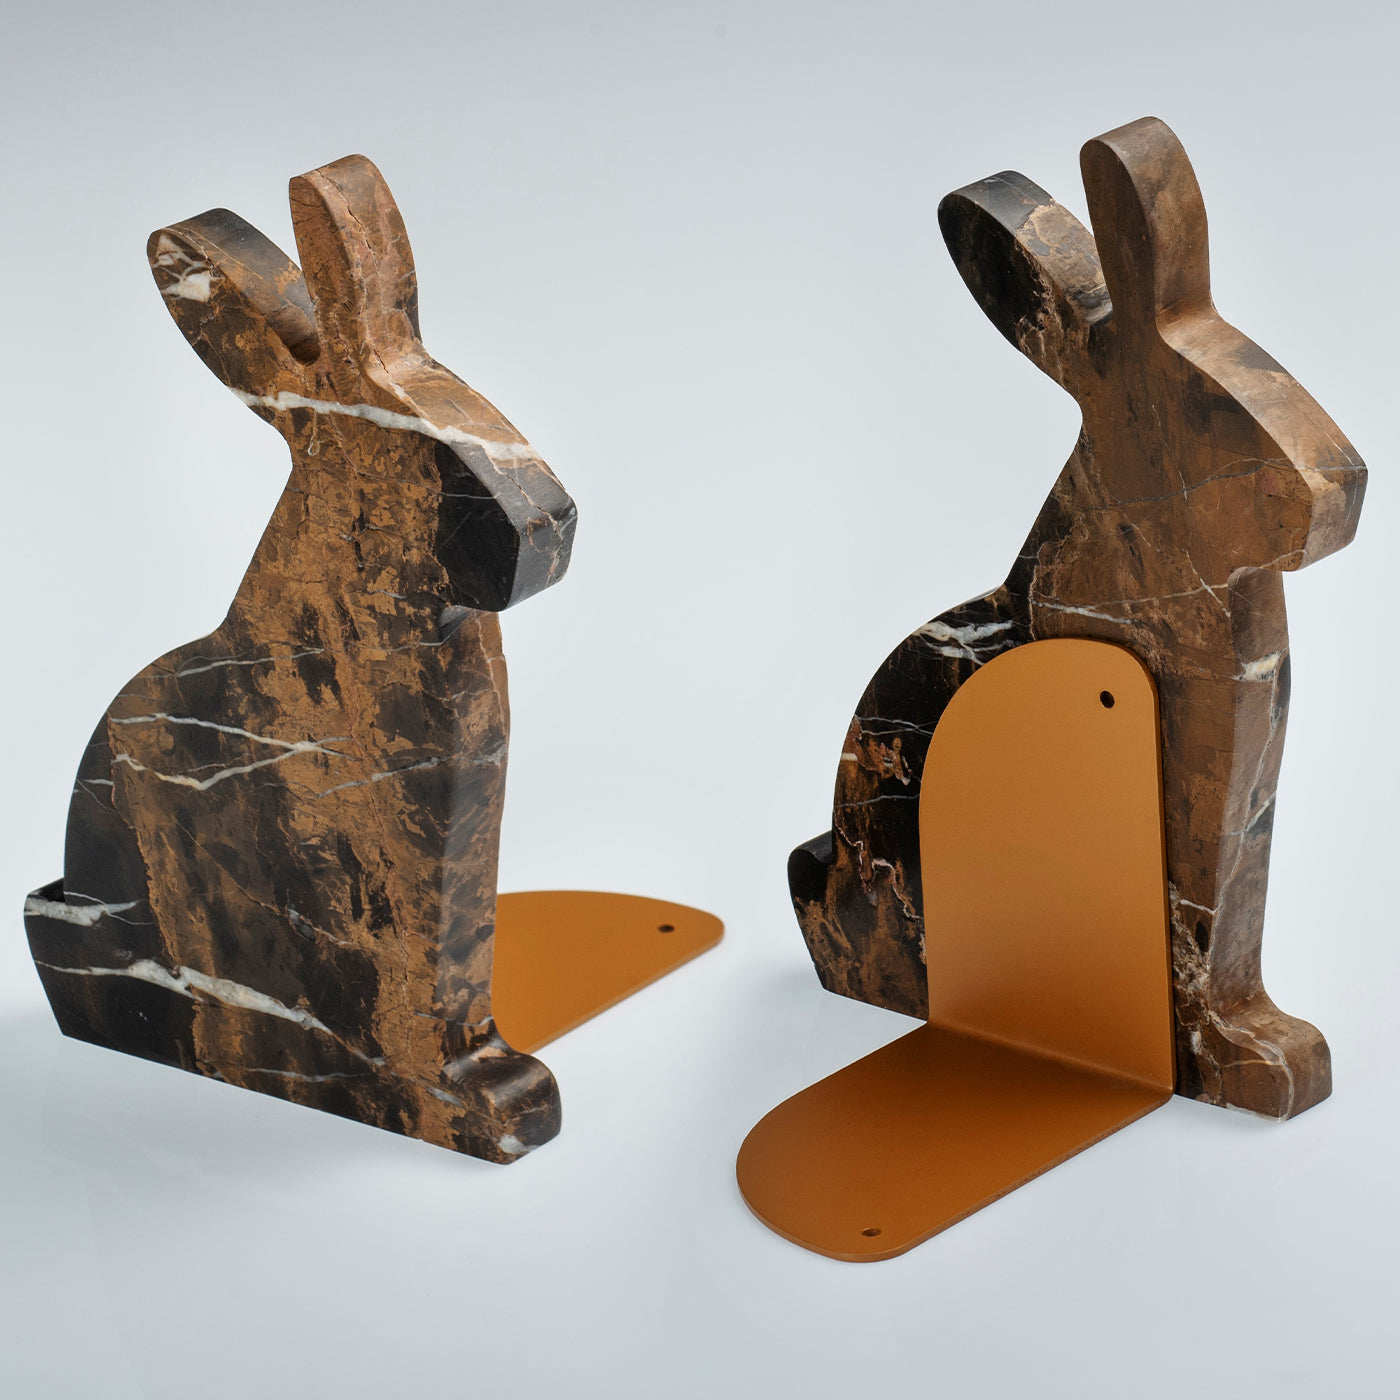 Bunny Black and Gold Right Bookend by Alessandra Grasso - Alternative view 2